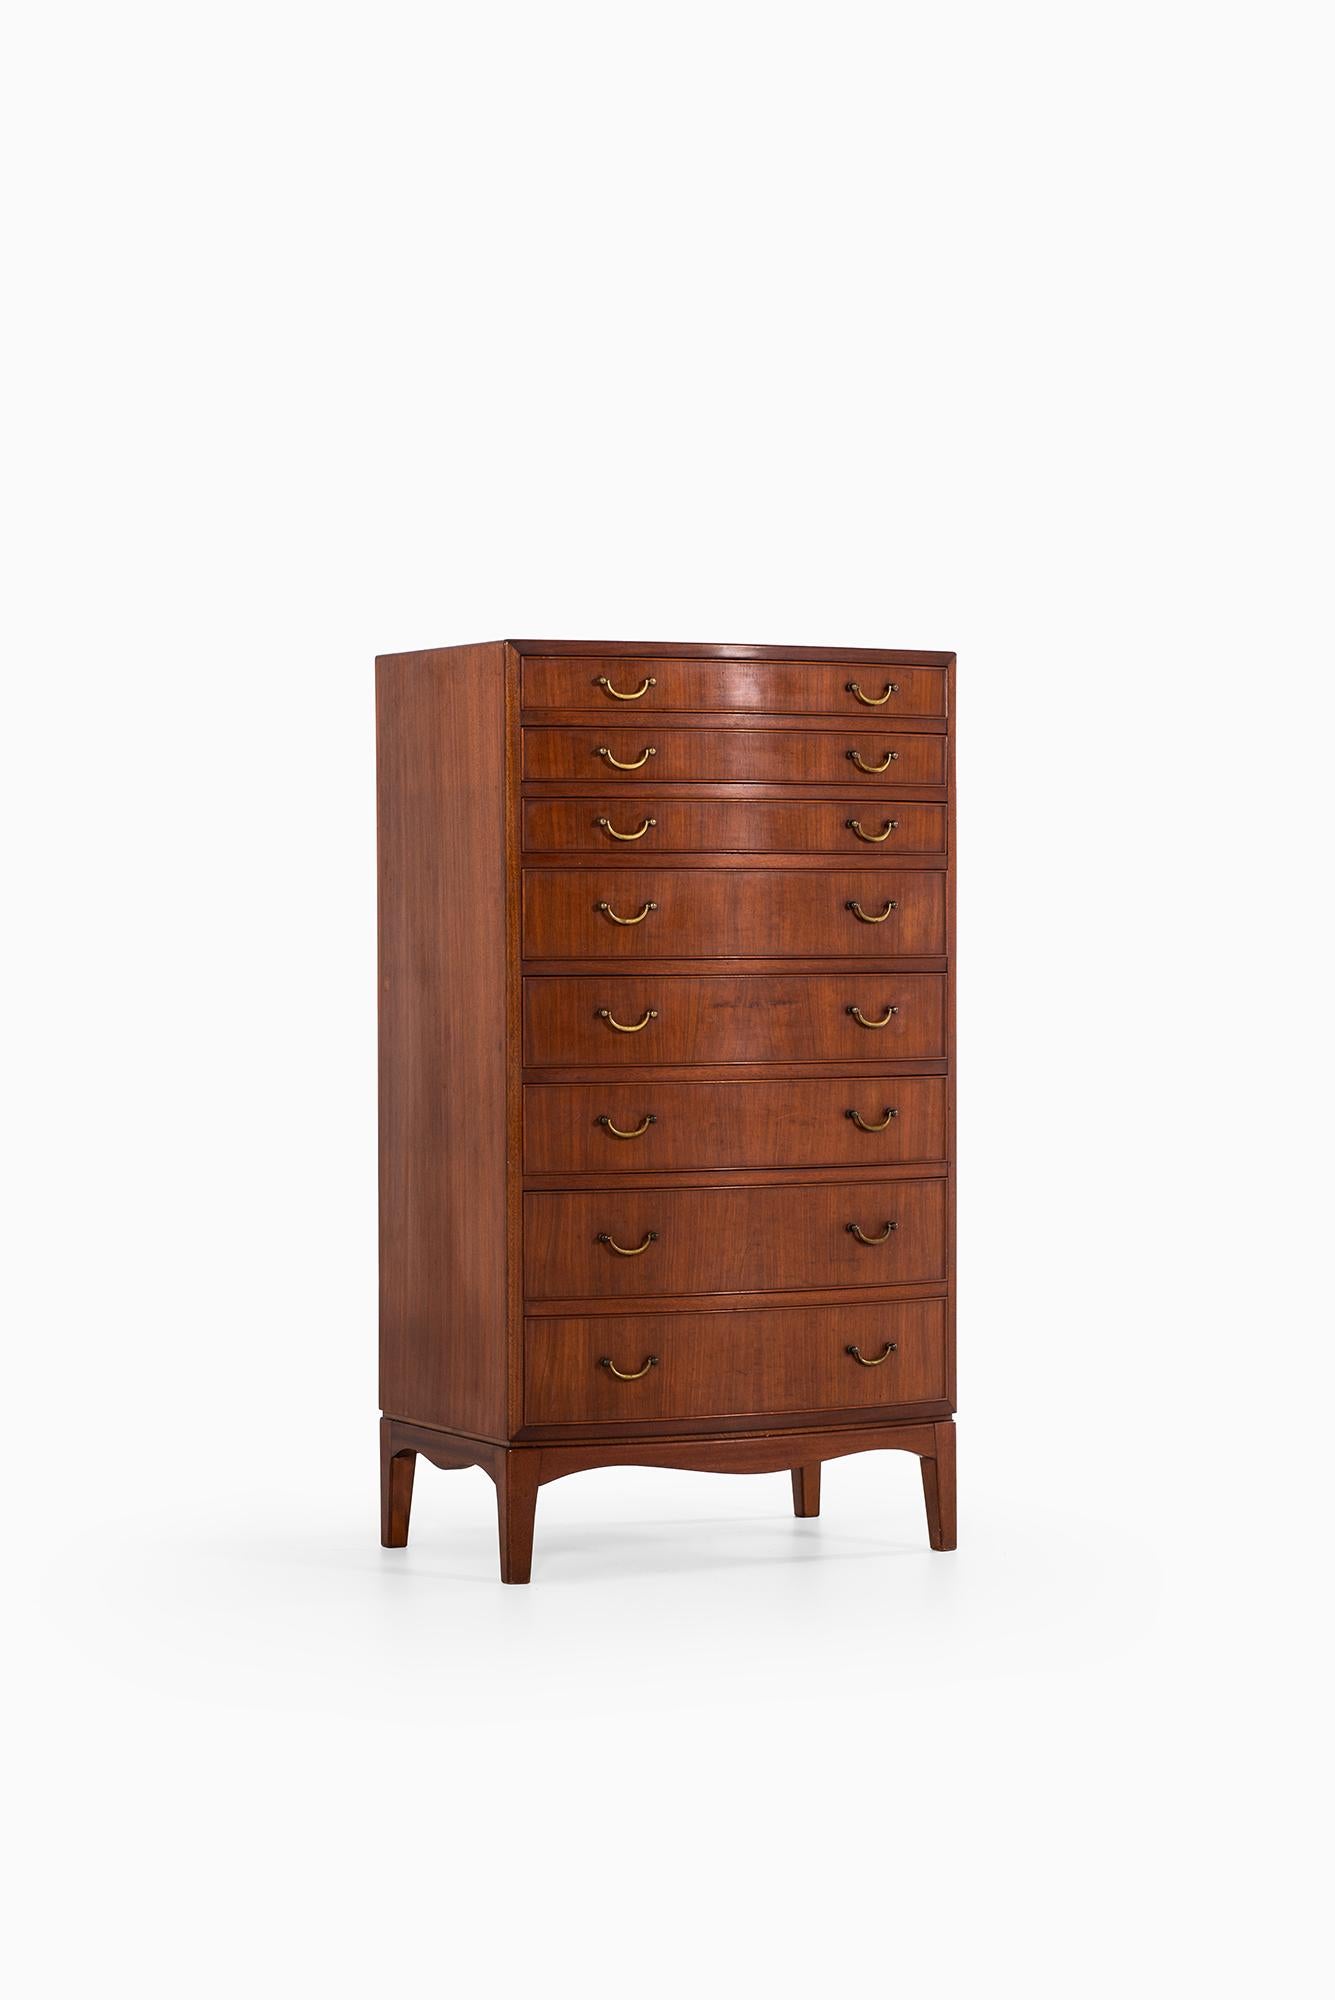 Danish Ole Wanscher Chest of Drawers by Cabinetmaker A.J Iversen in Denmark